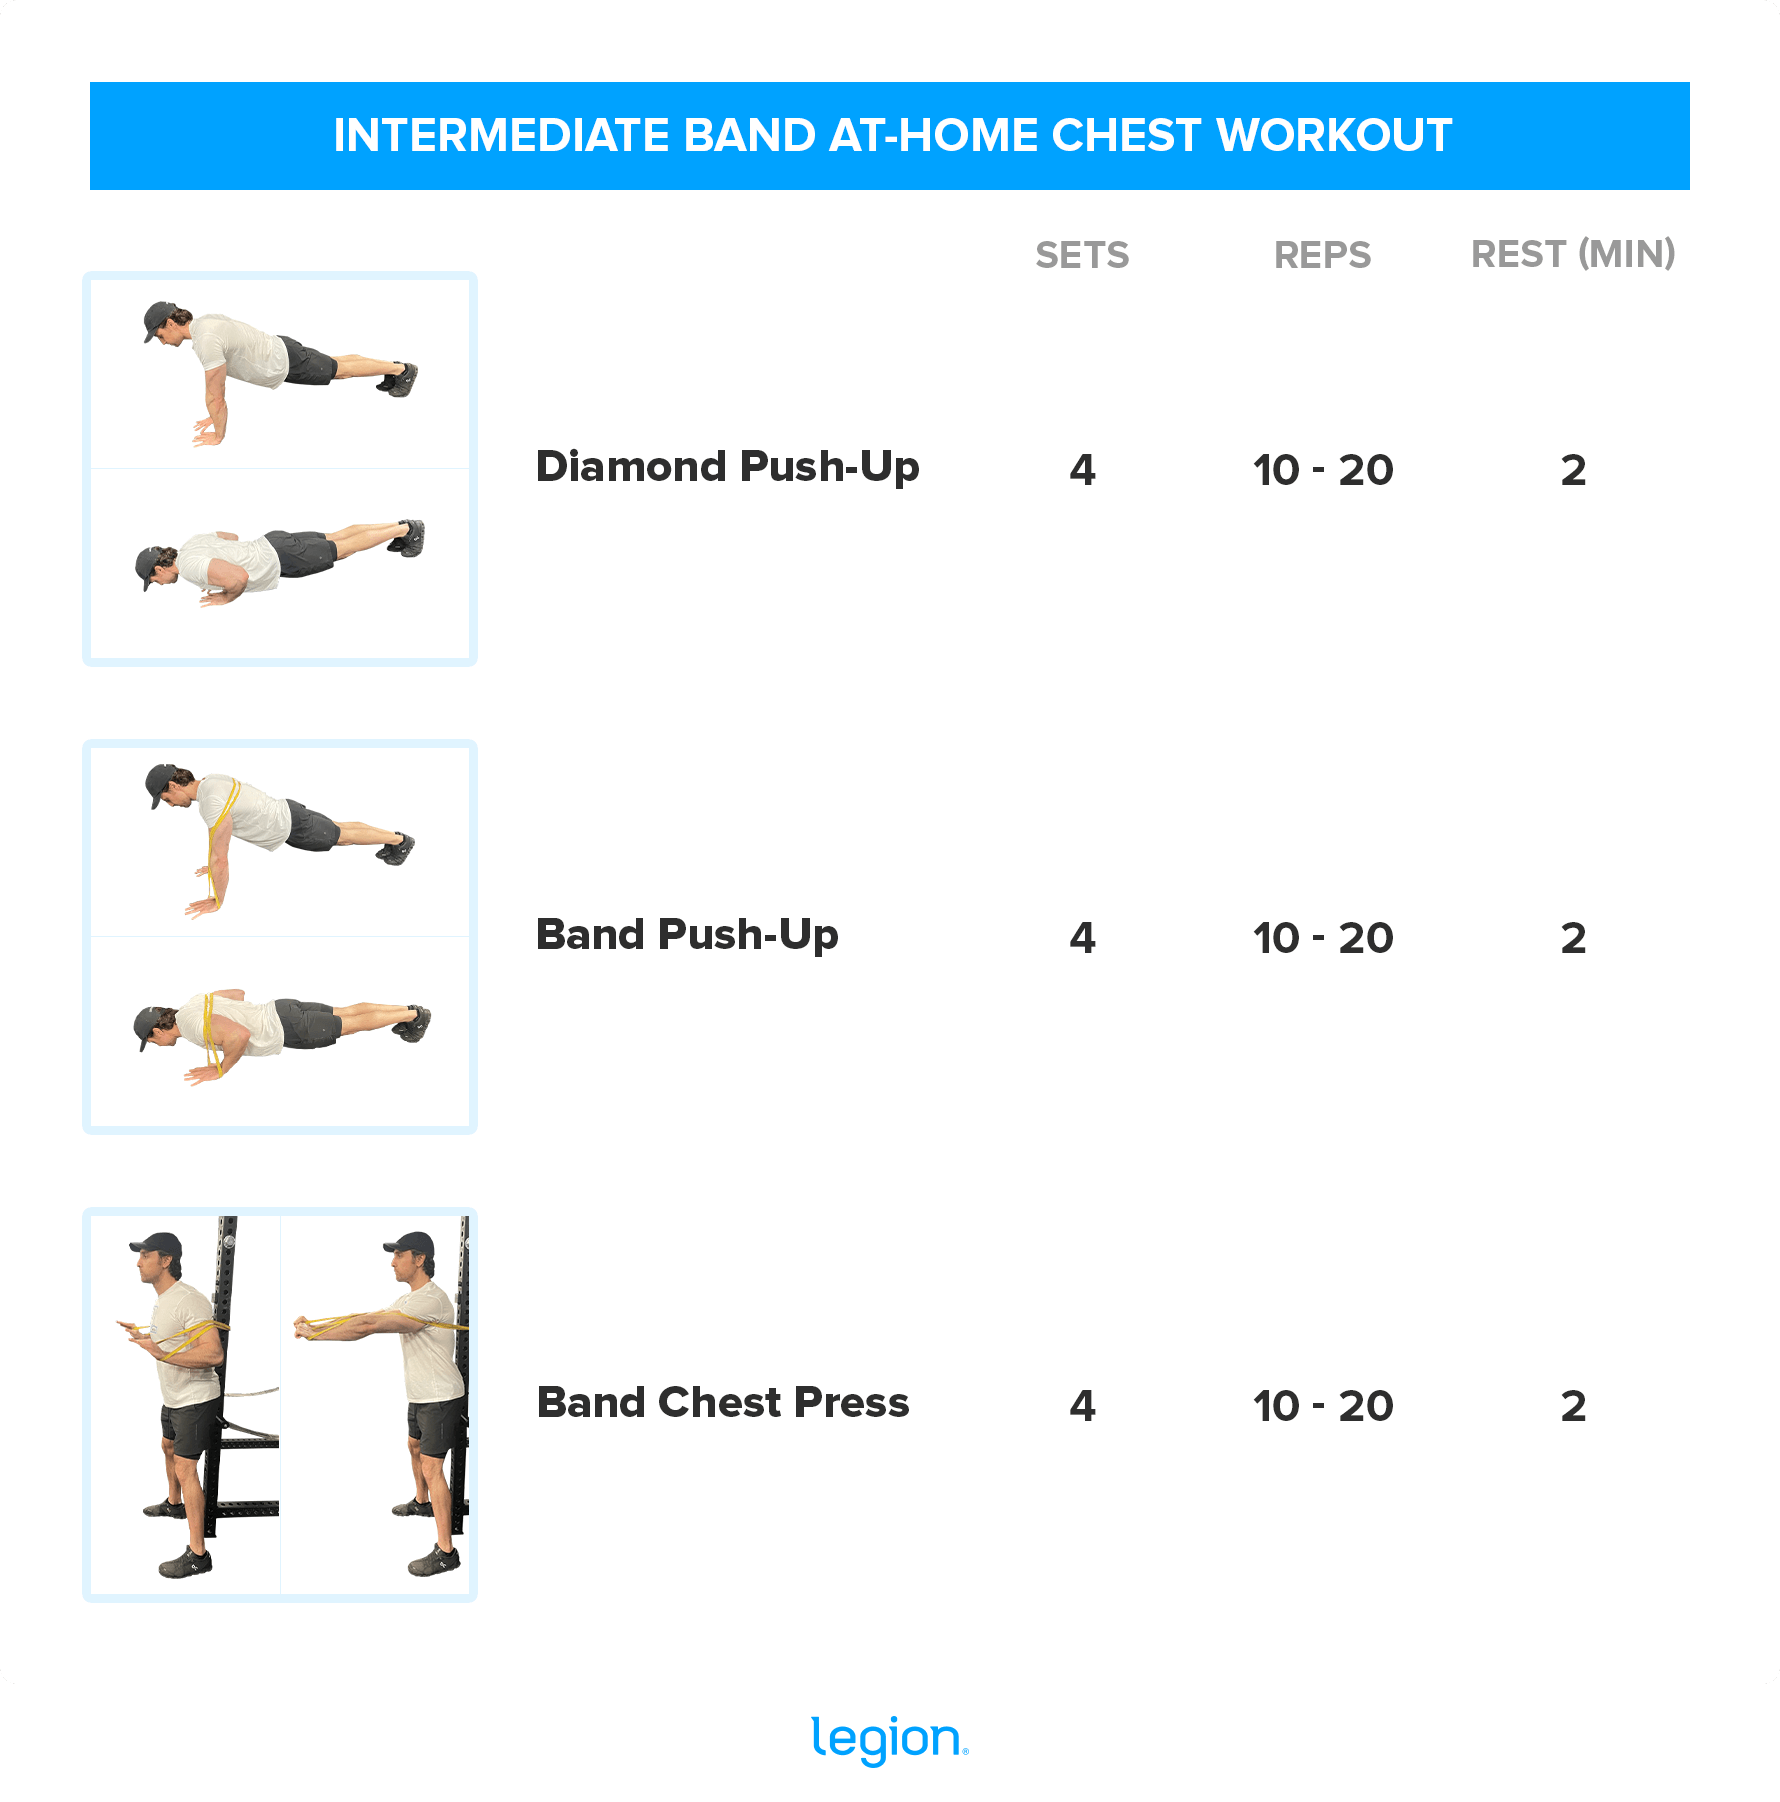 INTERMEDIATE BAND AT-HOME CHEST WORKOUT